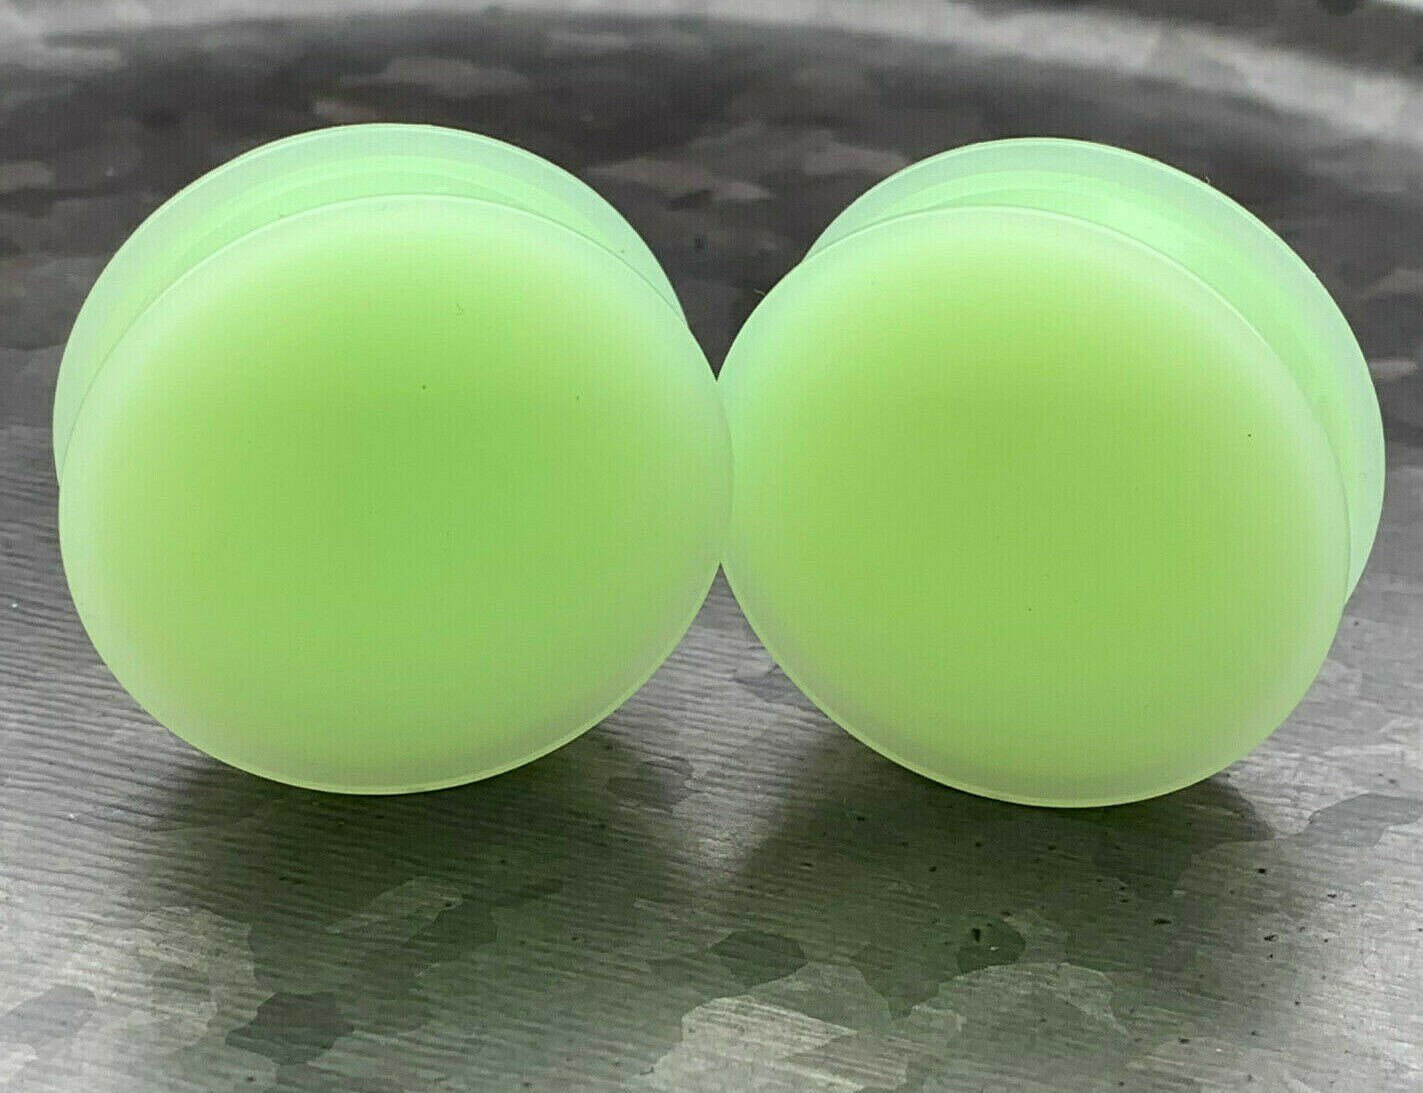 PAIR of Stunning Glow in the Dark Solid Silicone Double Flare Plugs - Gauges 2g (6mm) up to 2" (51mm) available!